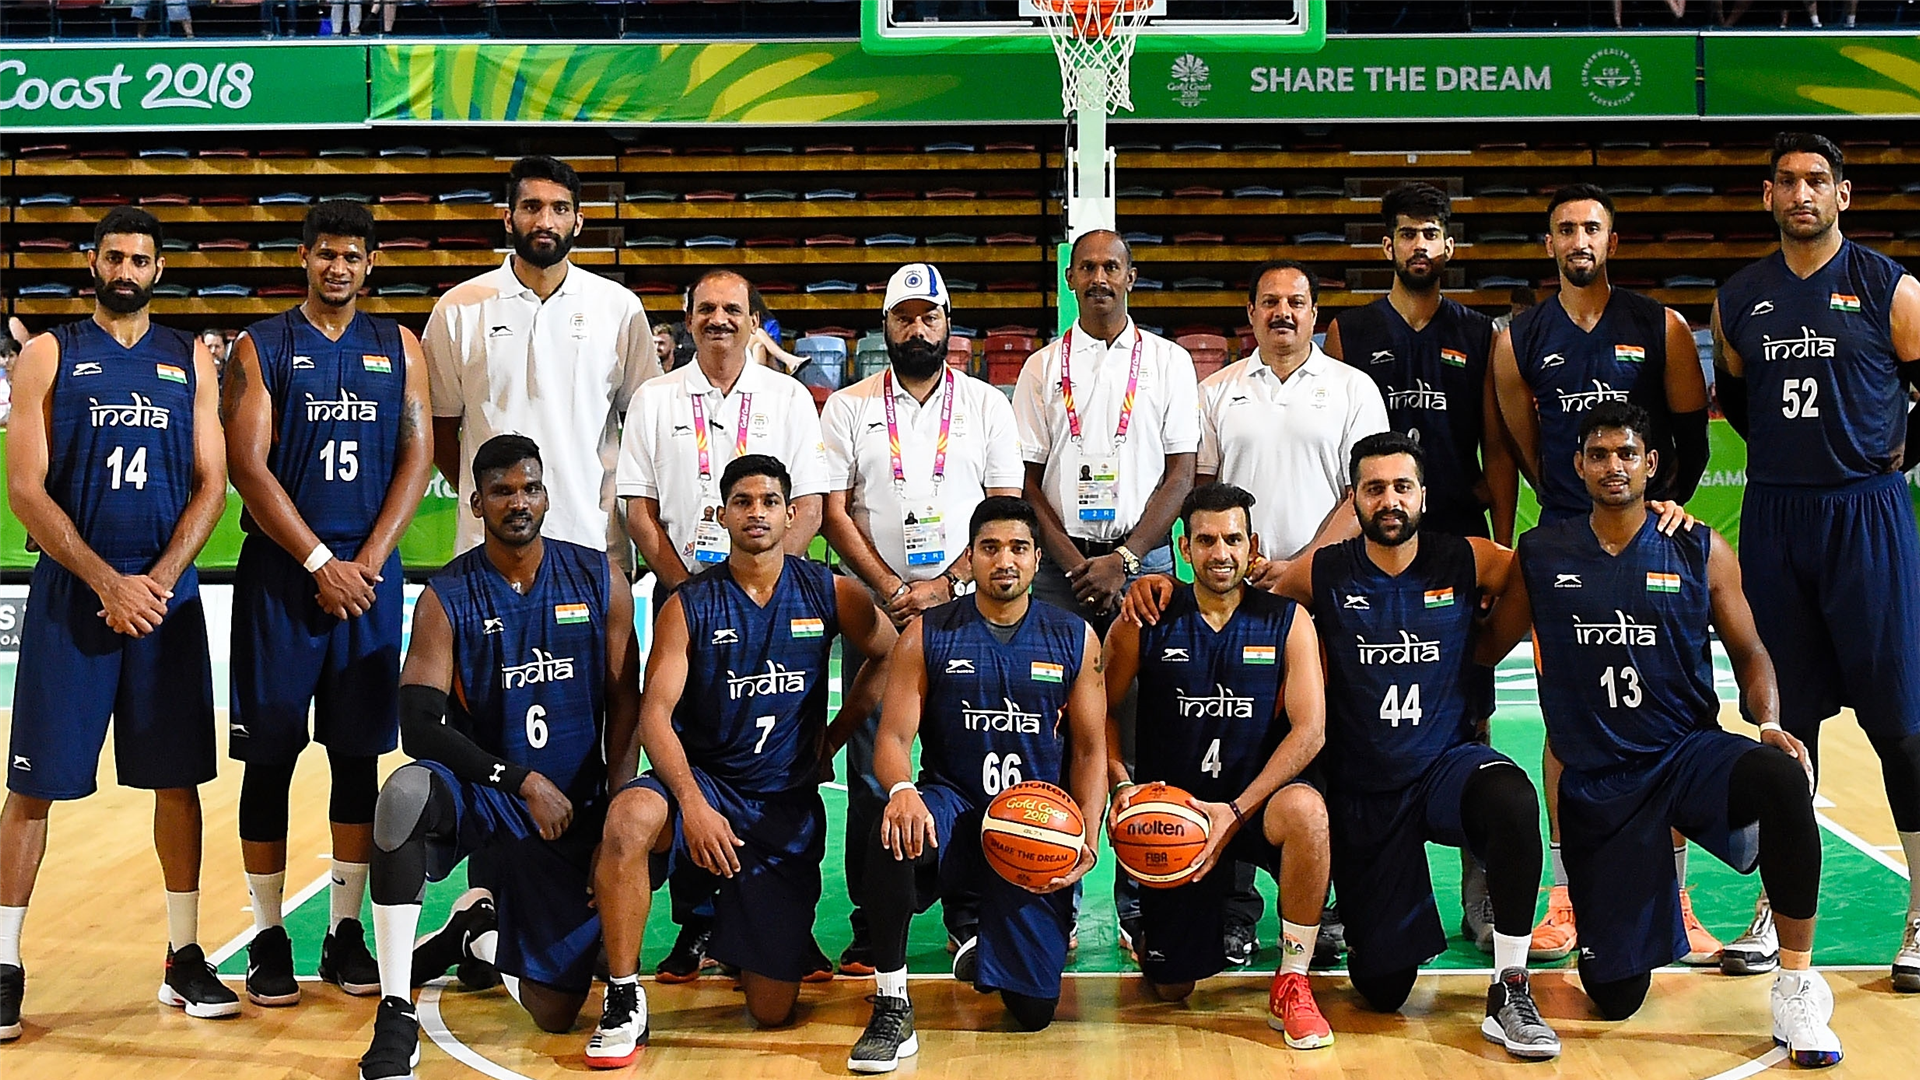 Why Basketball Sport is not popular in India?